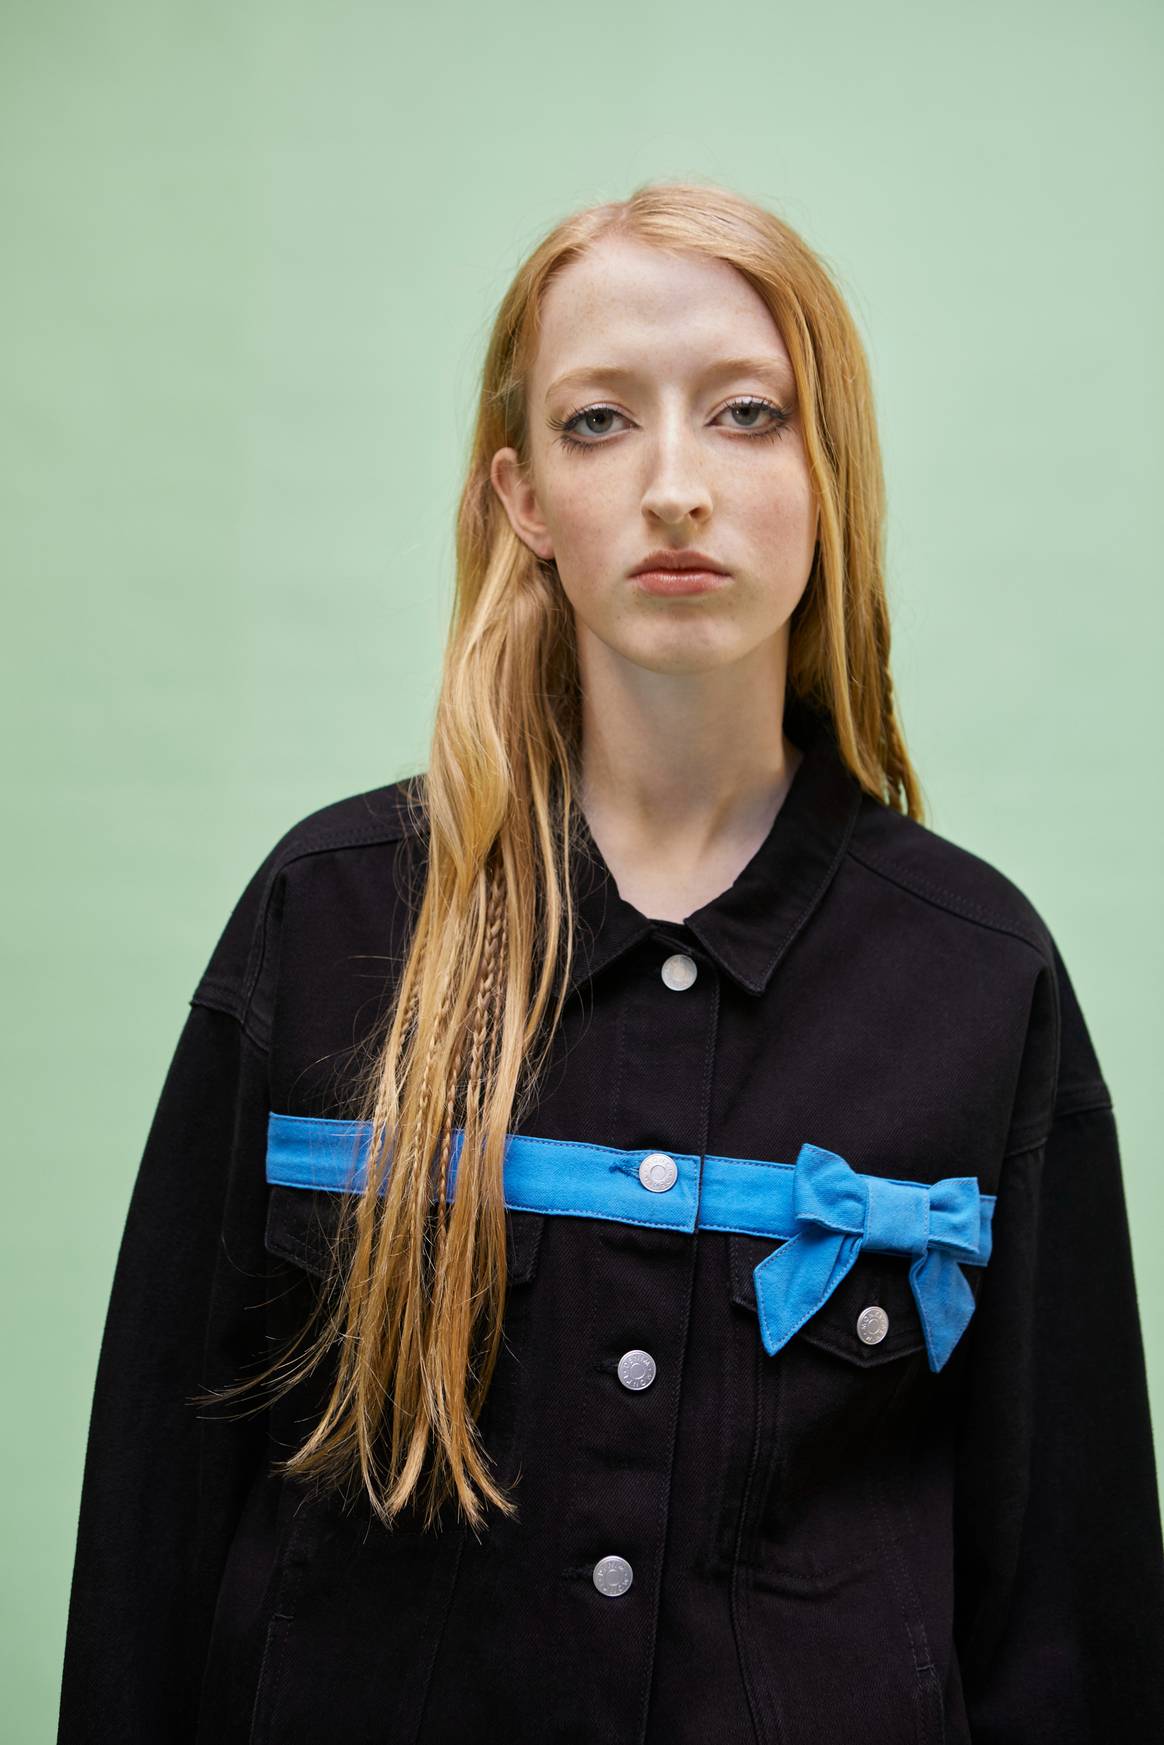 Monki x Iggy Jeans collection